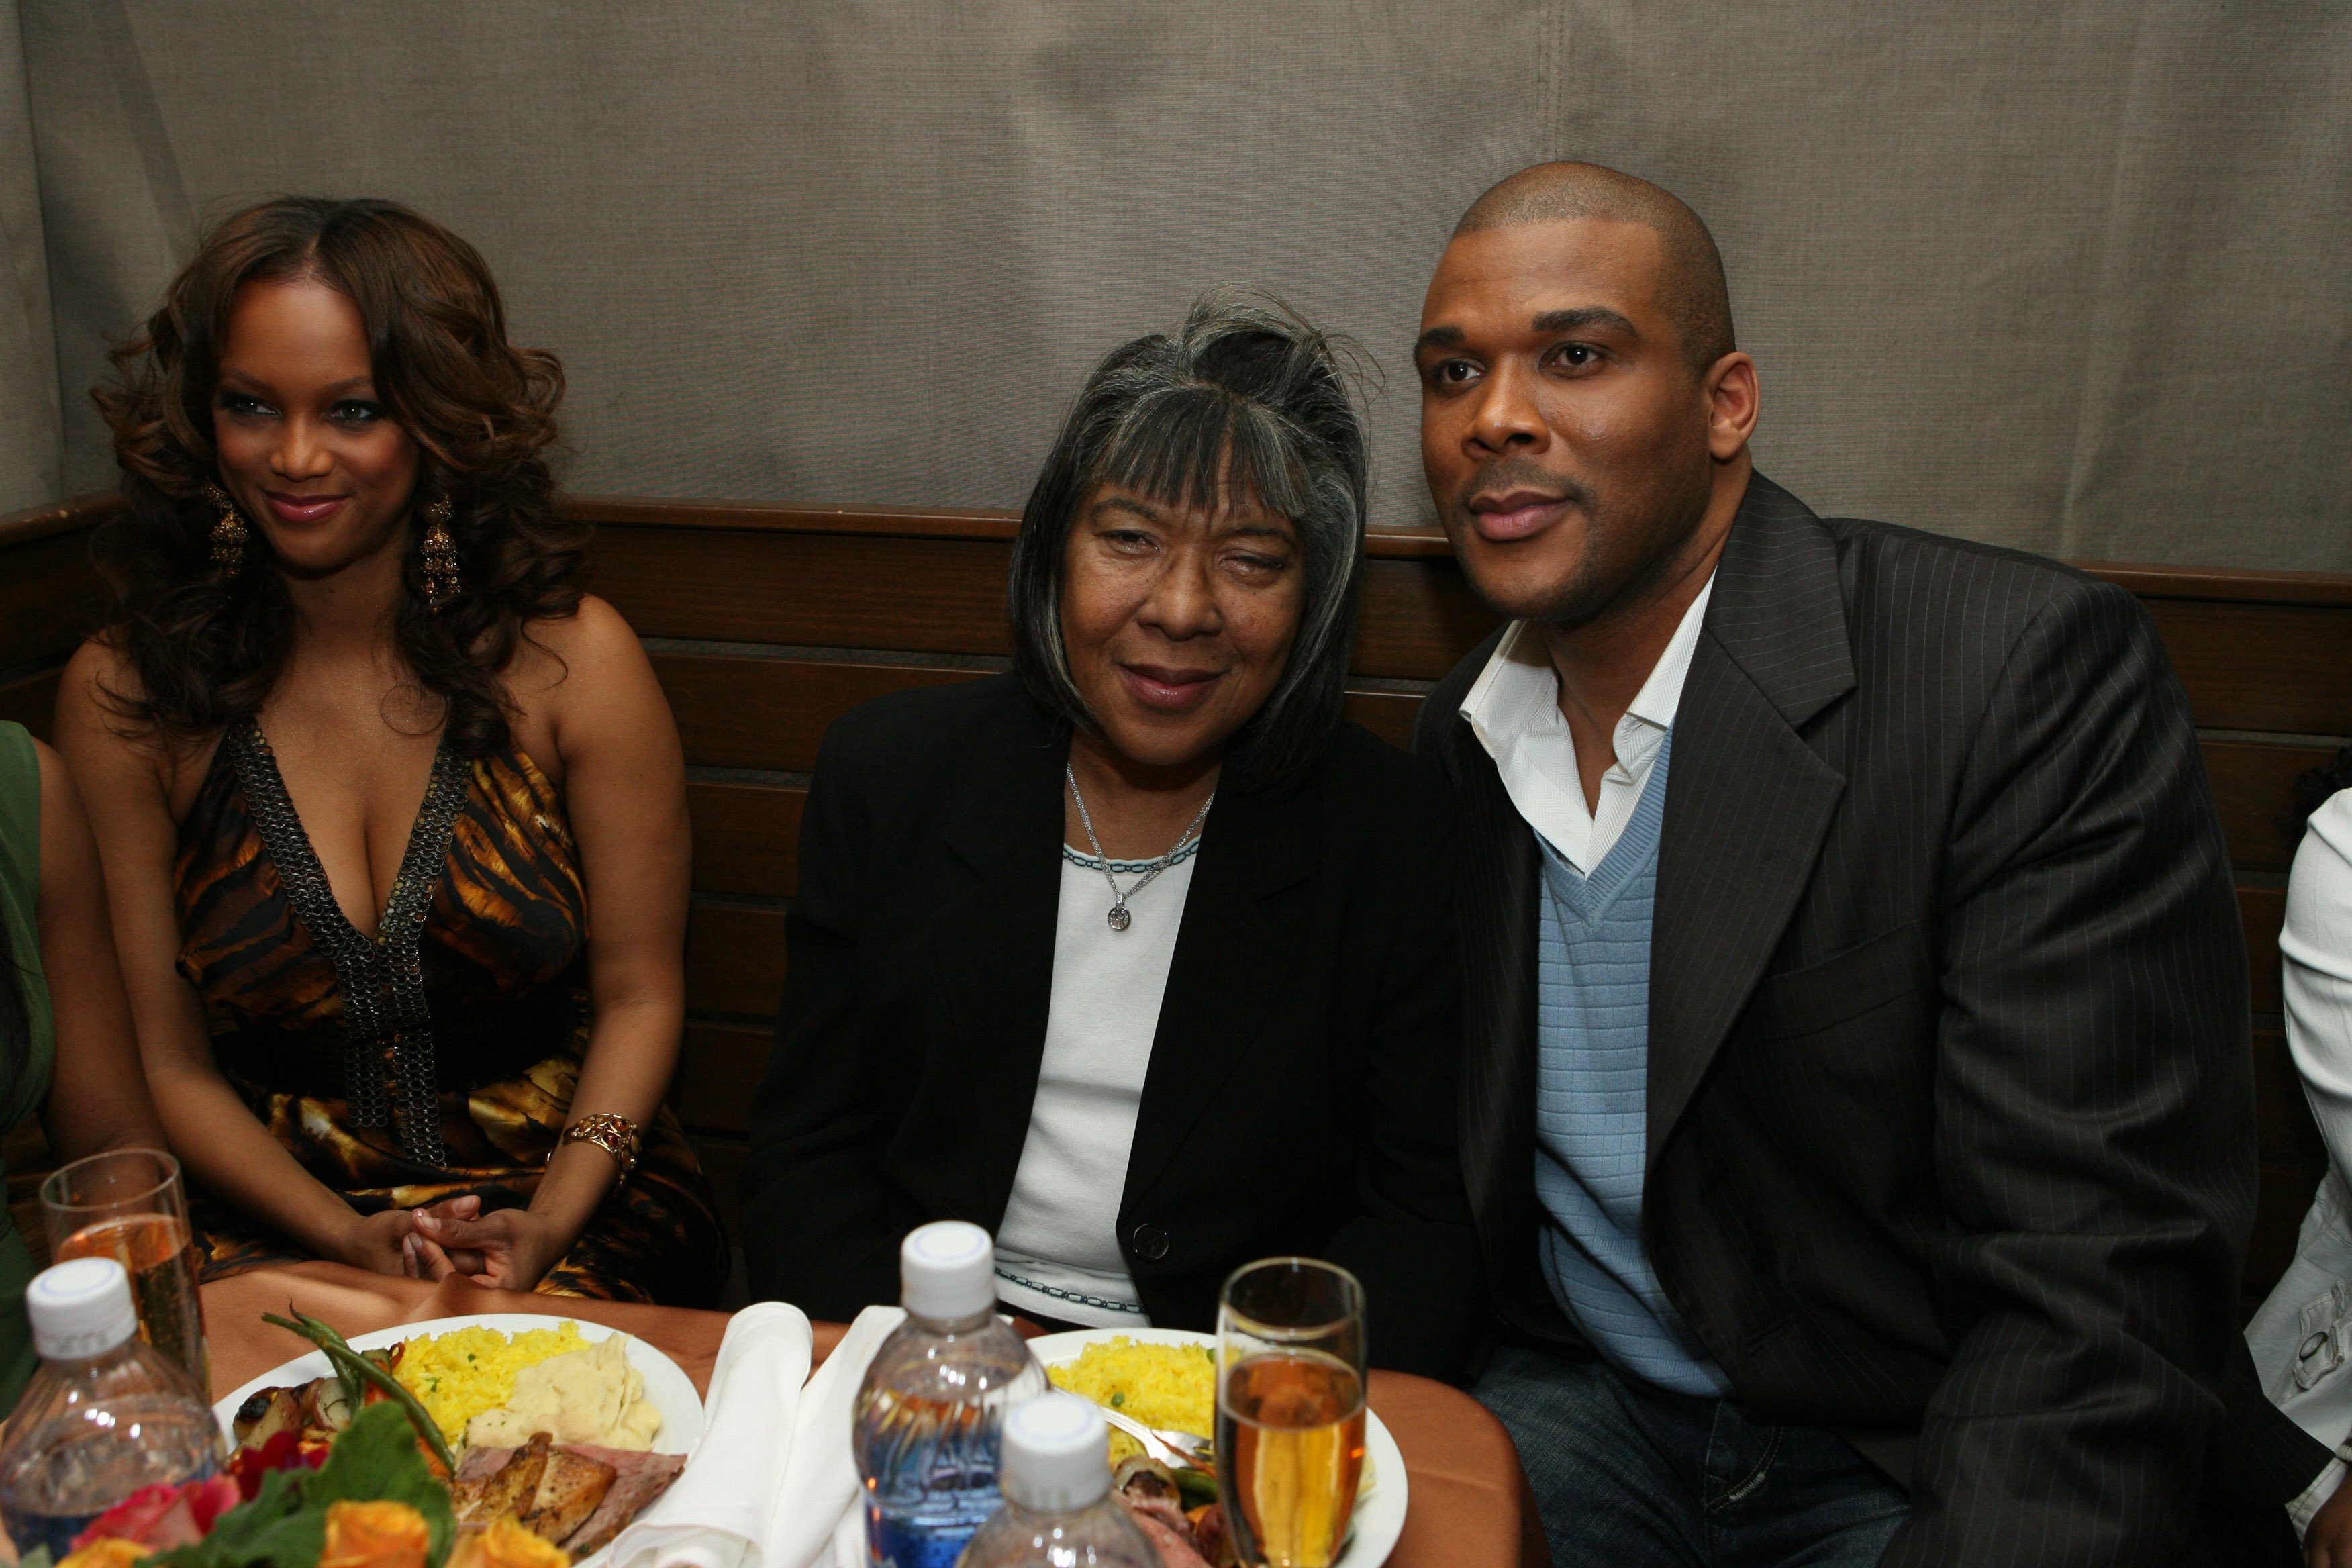 Tyra Banks, Maxine Perry, and Tyler Perry at the premiere of Lionsgate's "Madea's Family Reunion" on February 21, 2006, Los Angeles, California | Photo: Getty Images